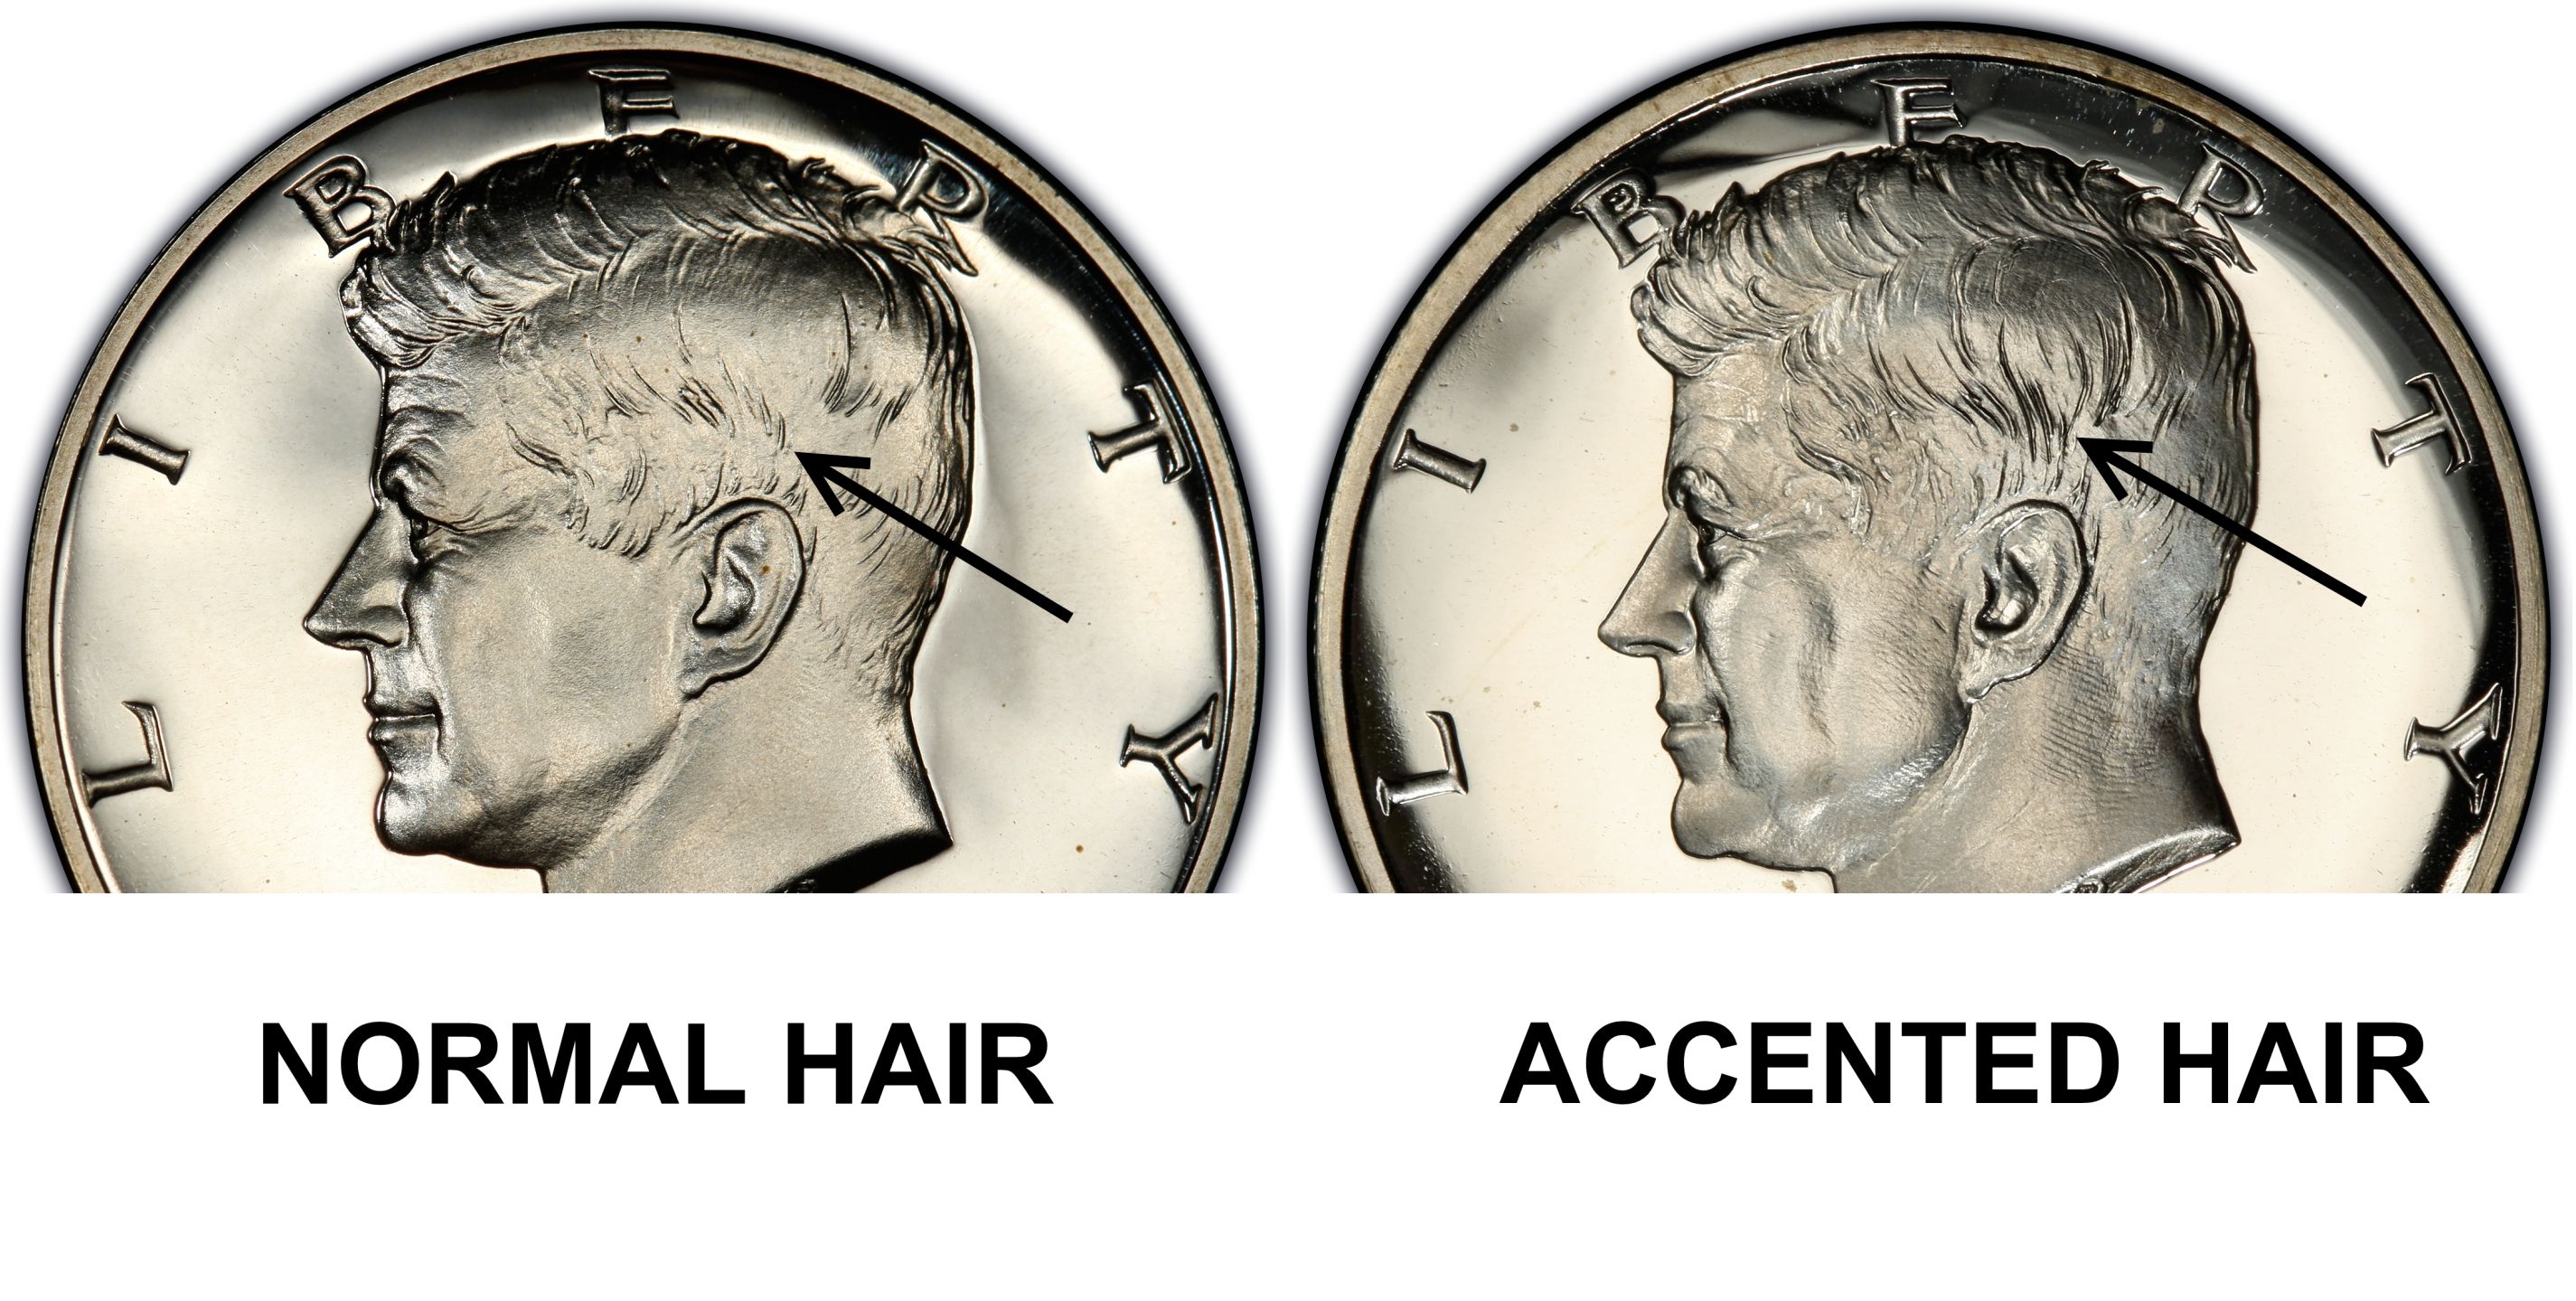 1964 50c Accented Hair Dcam Proof Kennedy Half Dollar Pcgs Coinfacts,Zanetti Parmigiano Reggiano Cheese